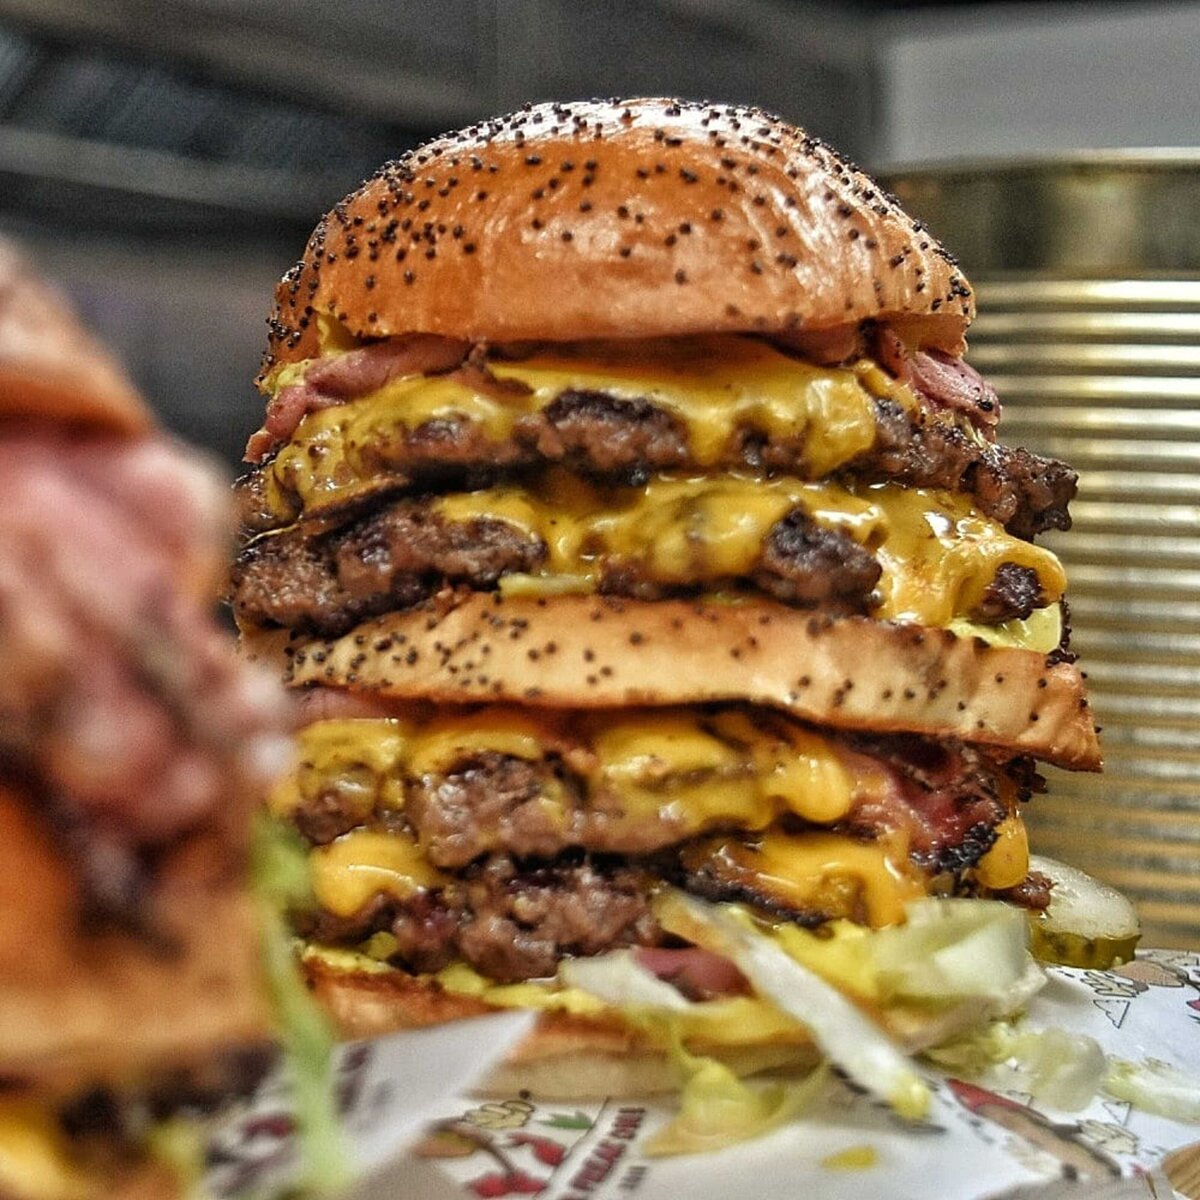 Huge quadruple stacked burger with bacon, cheese, gherkins and lettuce